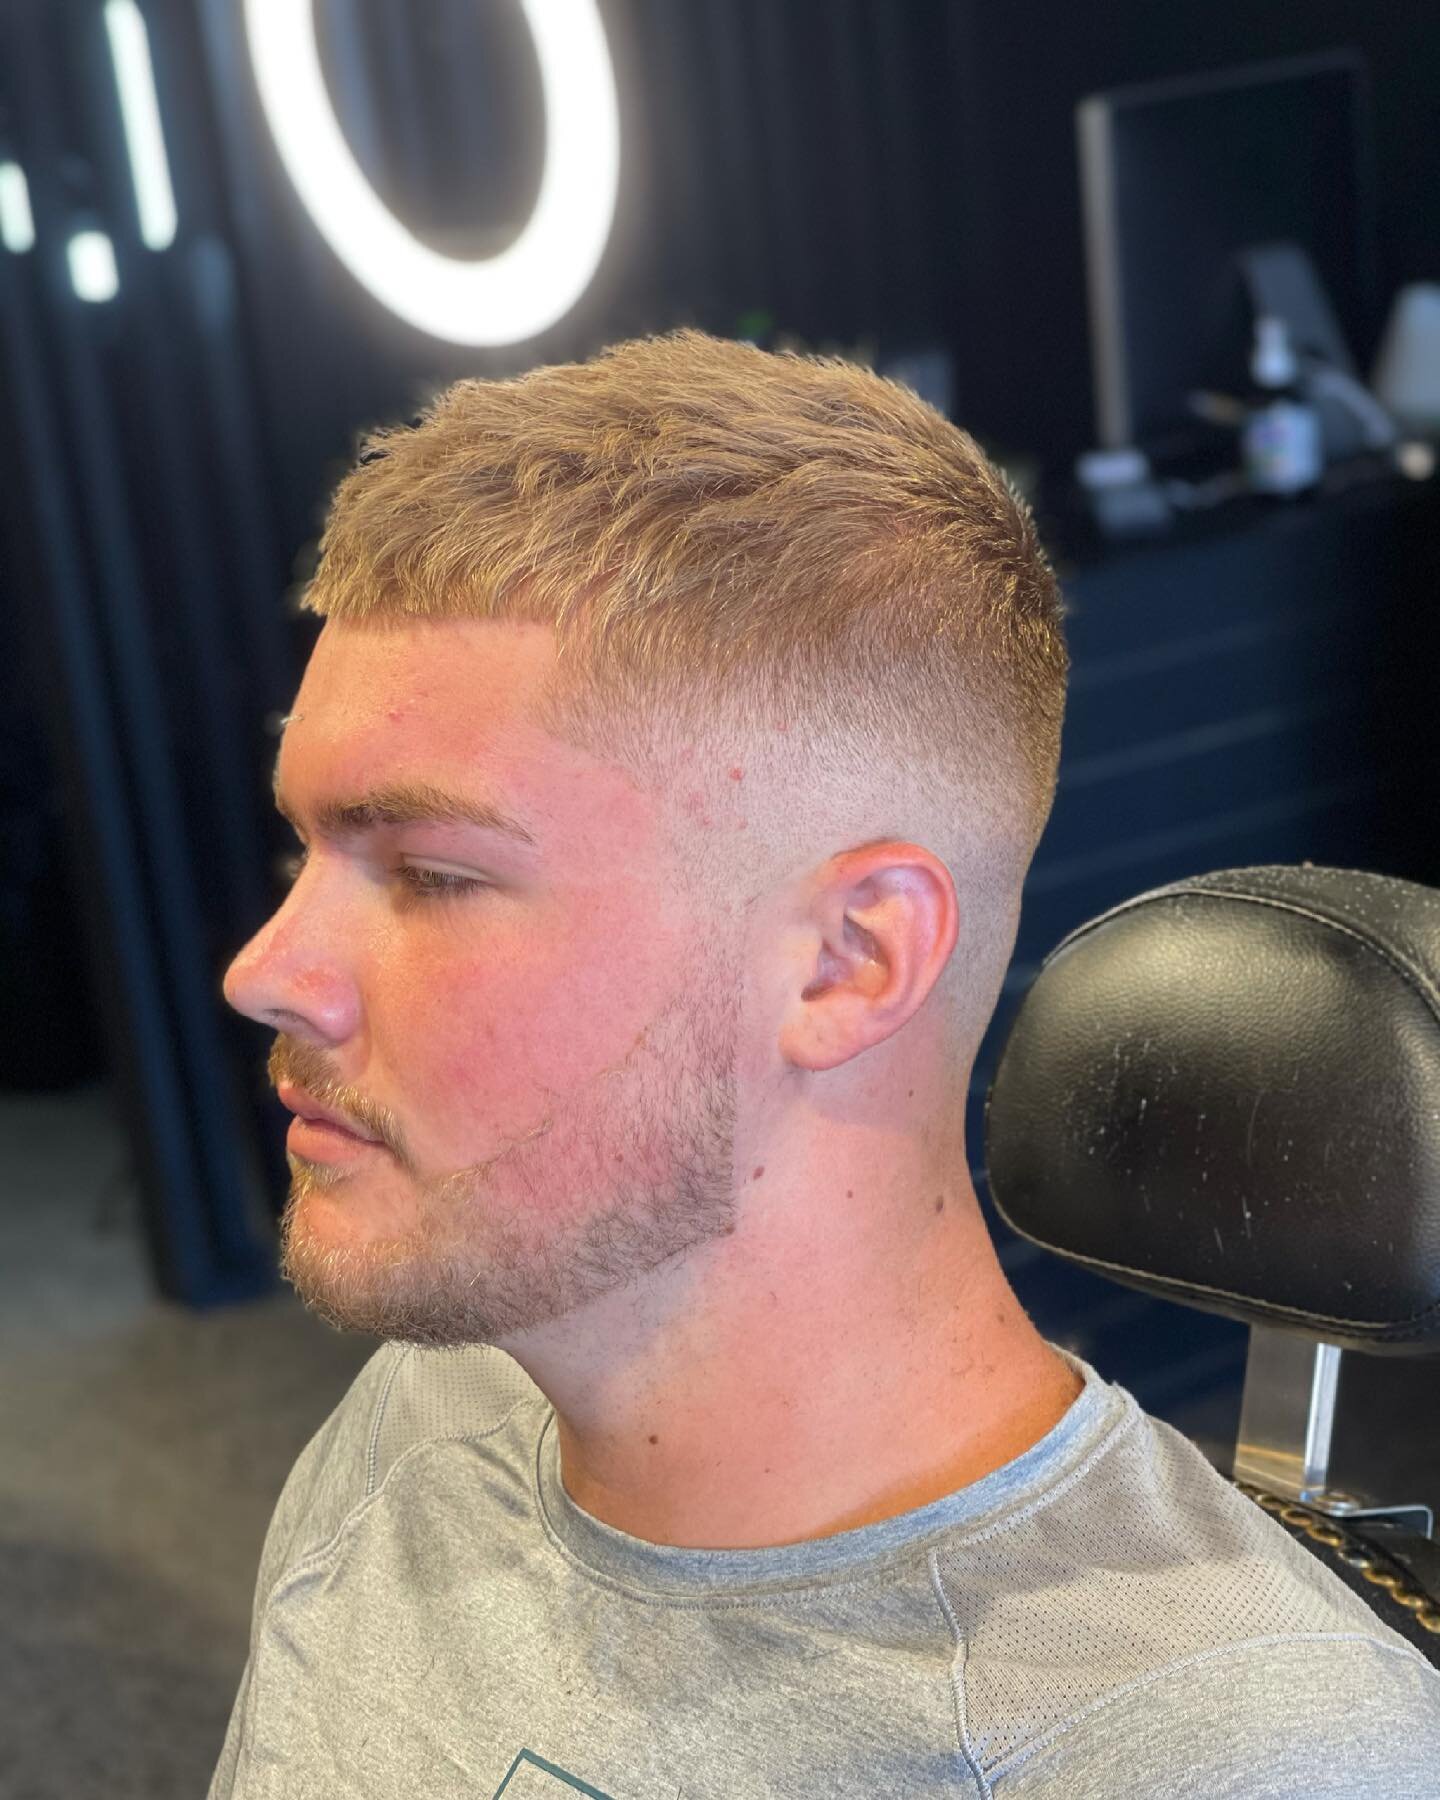 Come and see us at 😎😎💯
18 Bakehouse lane, Orewa

Opposite Dear Coasties and Subway 

Open 7 days a week 💈 💫 

visit our website 
www.drscissors.co.nz

#barber 
#barbershop 
#fades 
#fadesfordays 
#razorfade 
#blade 
#barbershopconnect 
#orewa 
#